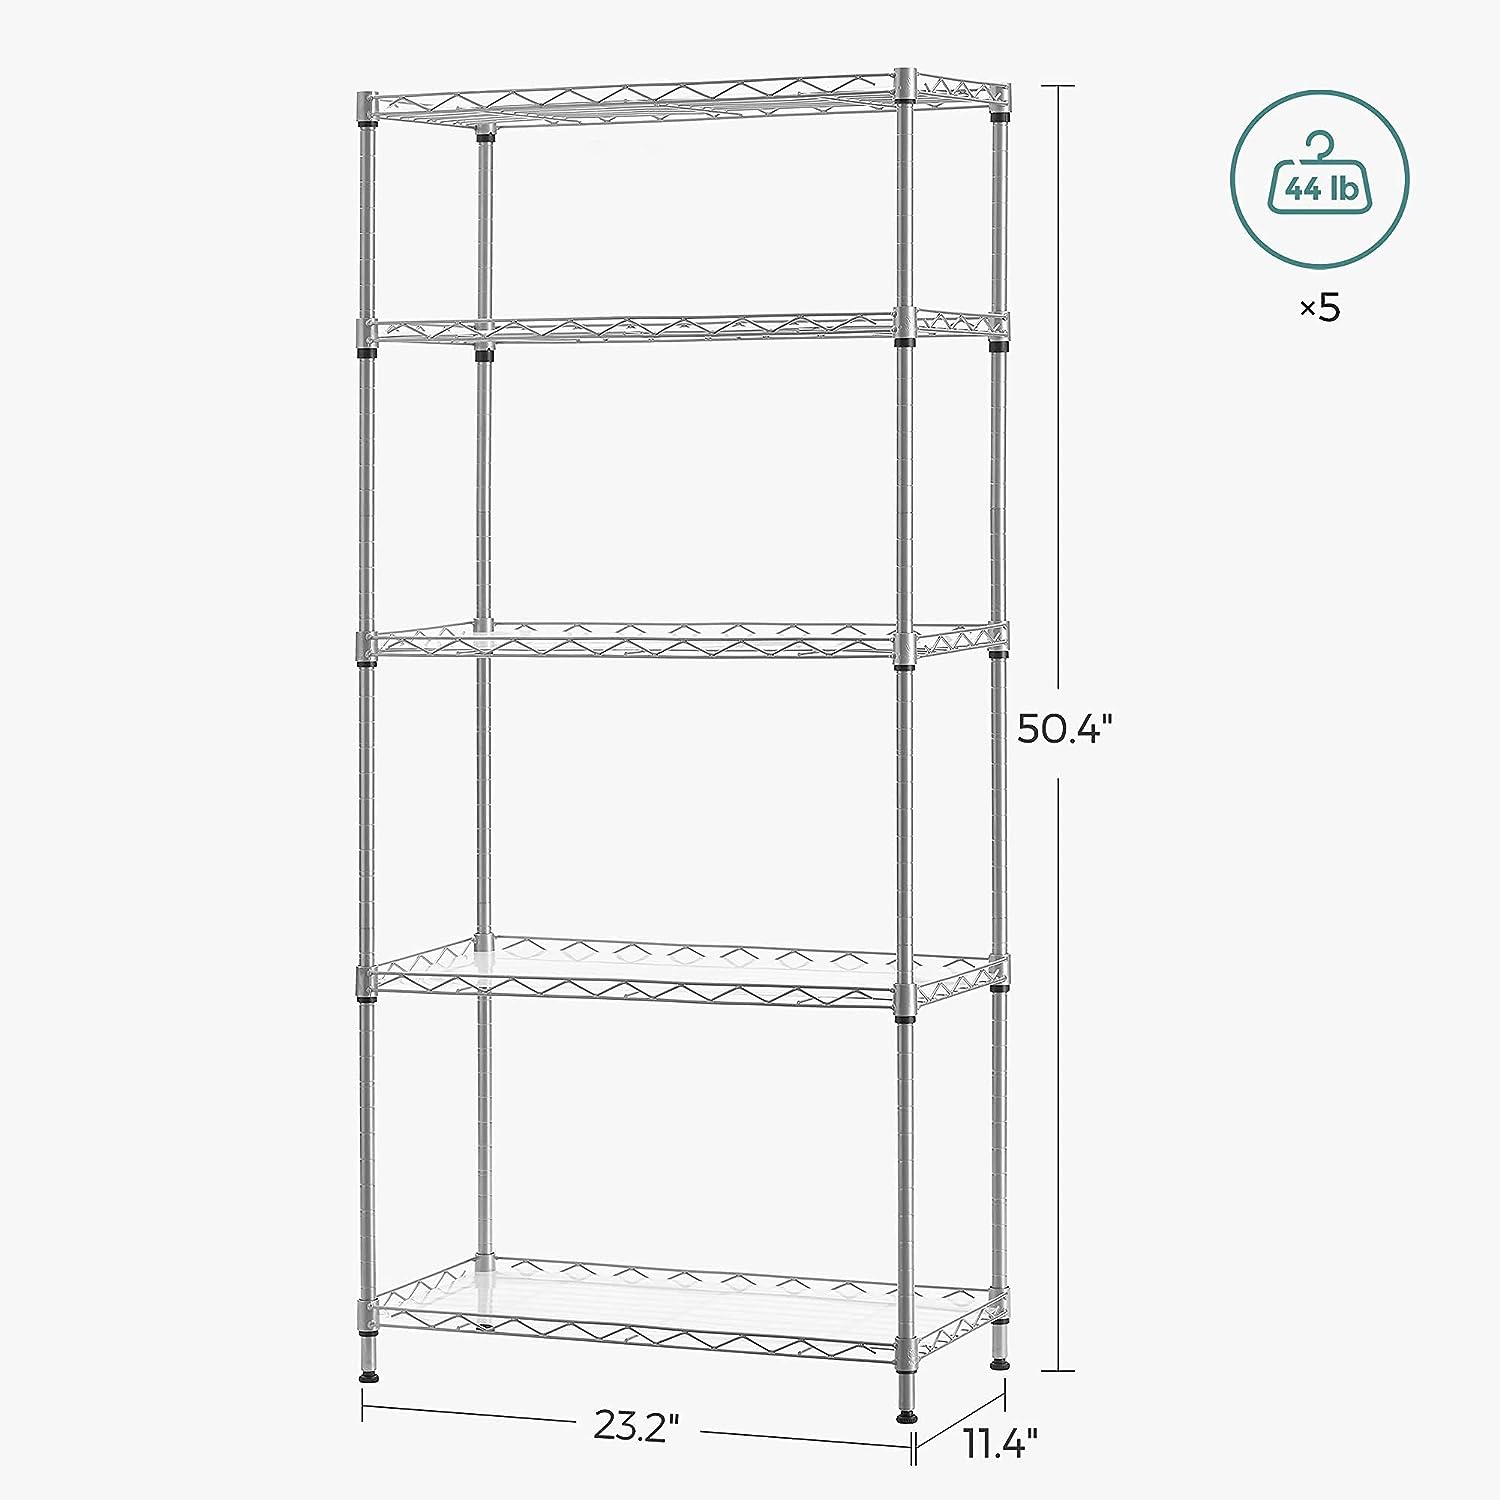 https://bigbigmart.com/wp-content/uploads/2023/08/SONGMICS-Kitchen-Shelf-Metal-Shelves-5-Tier-Wire-Shelving-Unit-with-8-Hooks-Narrow-Storage-Rack-with-PP-Shelf-Liners-Height-Adjustable-for-Bathroom-Pantry-Silver-ULGR065E014.jpg